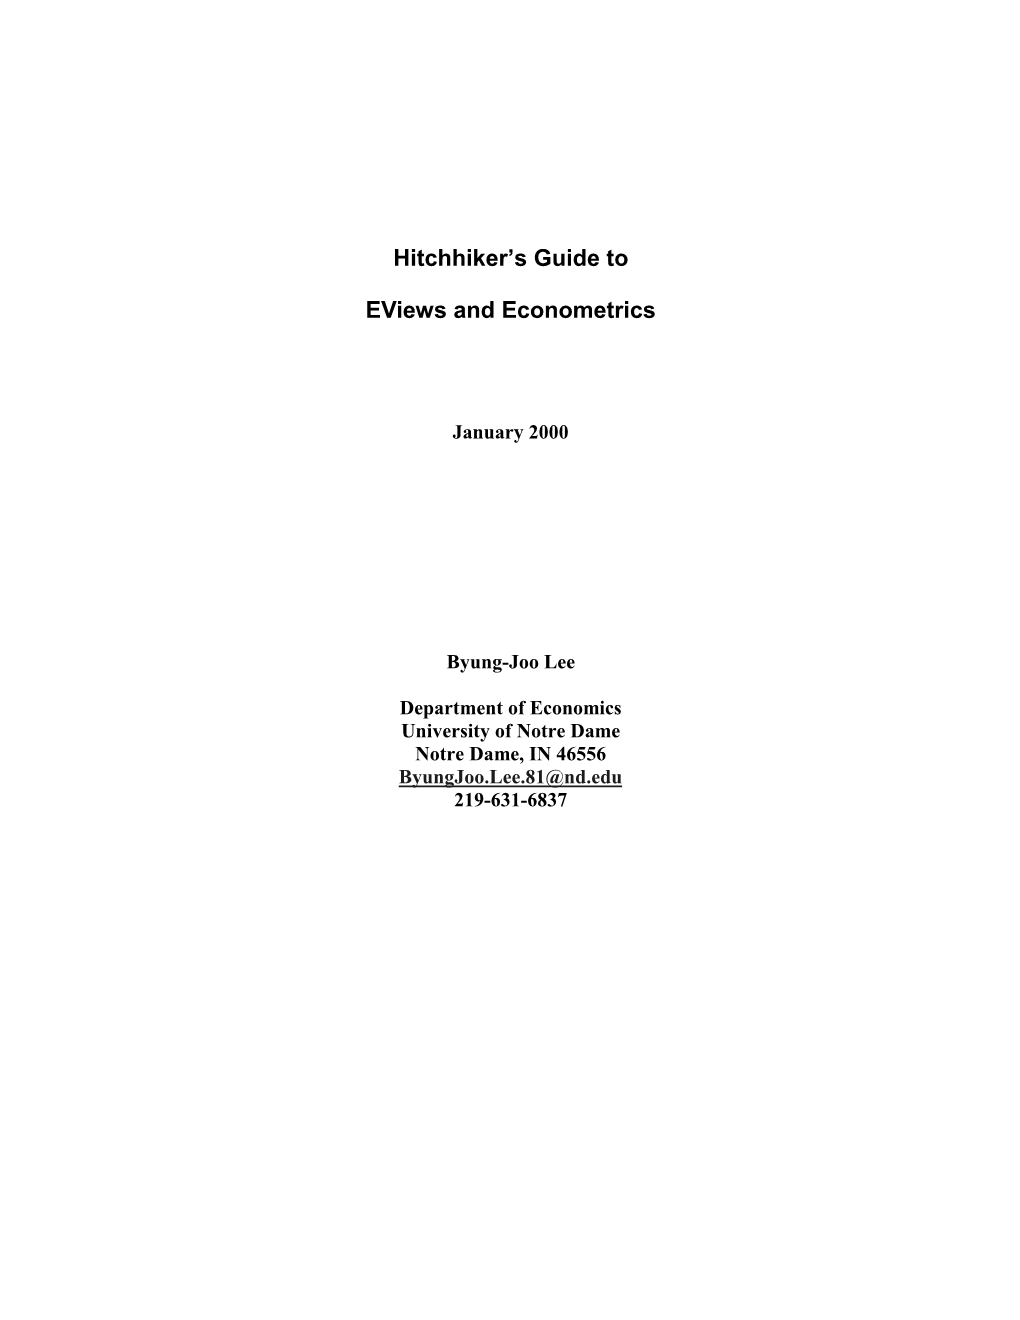 Hitchhiker's Guide to Eviews and Econometrics